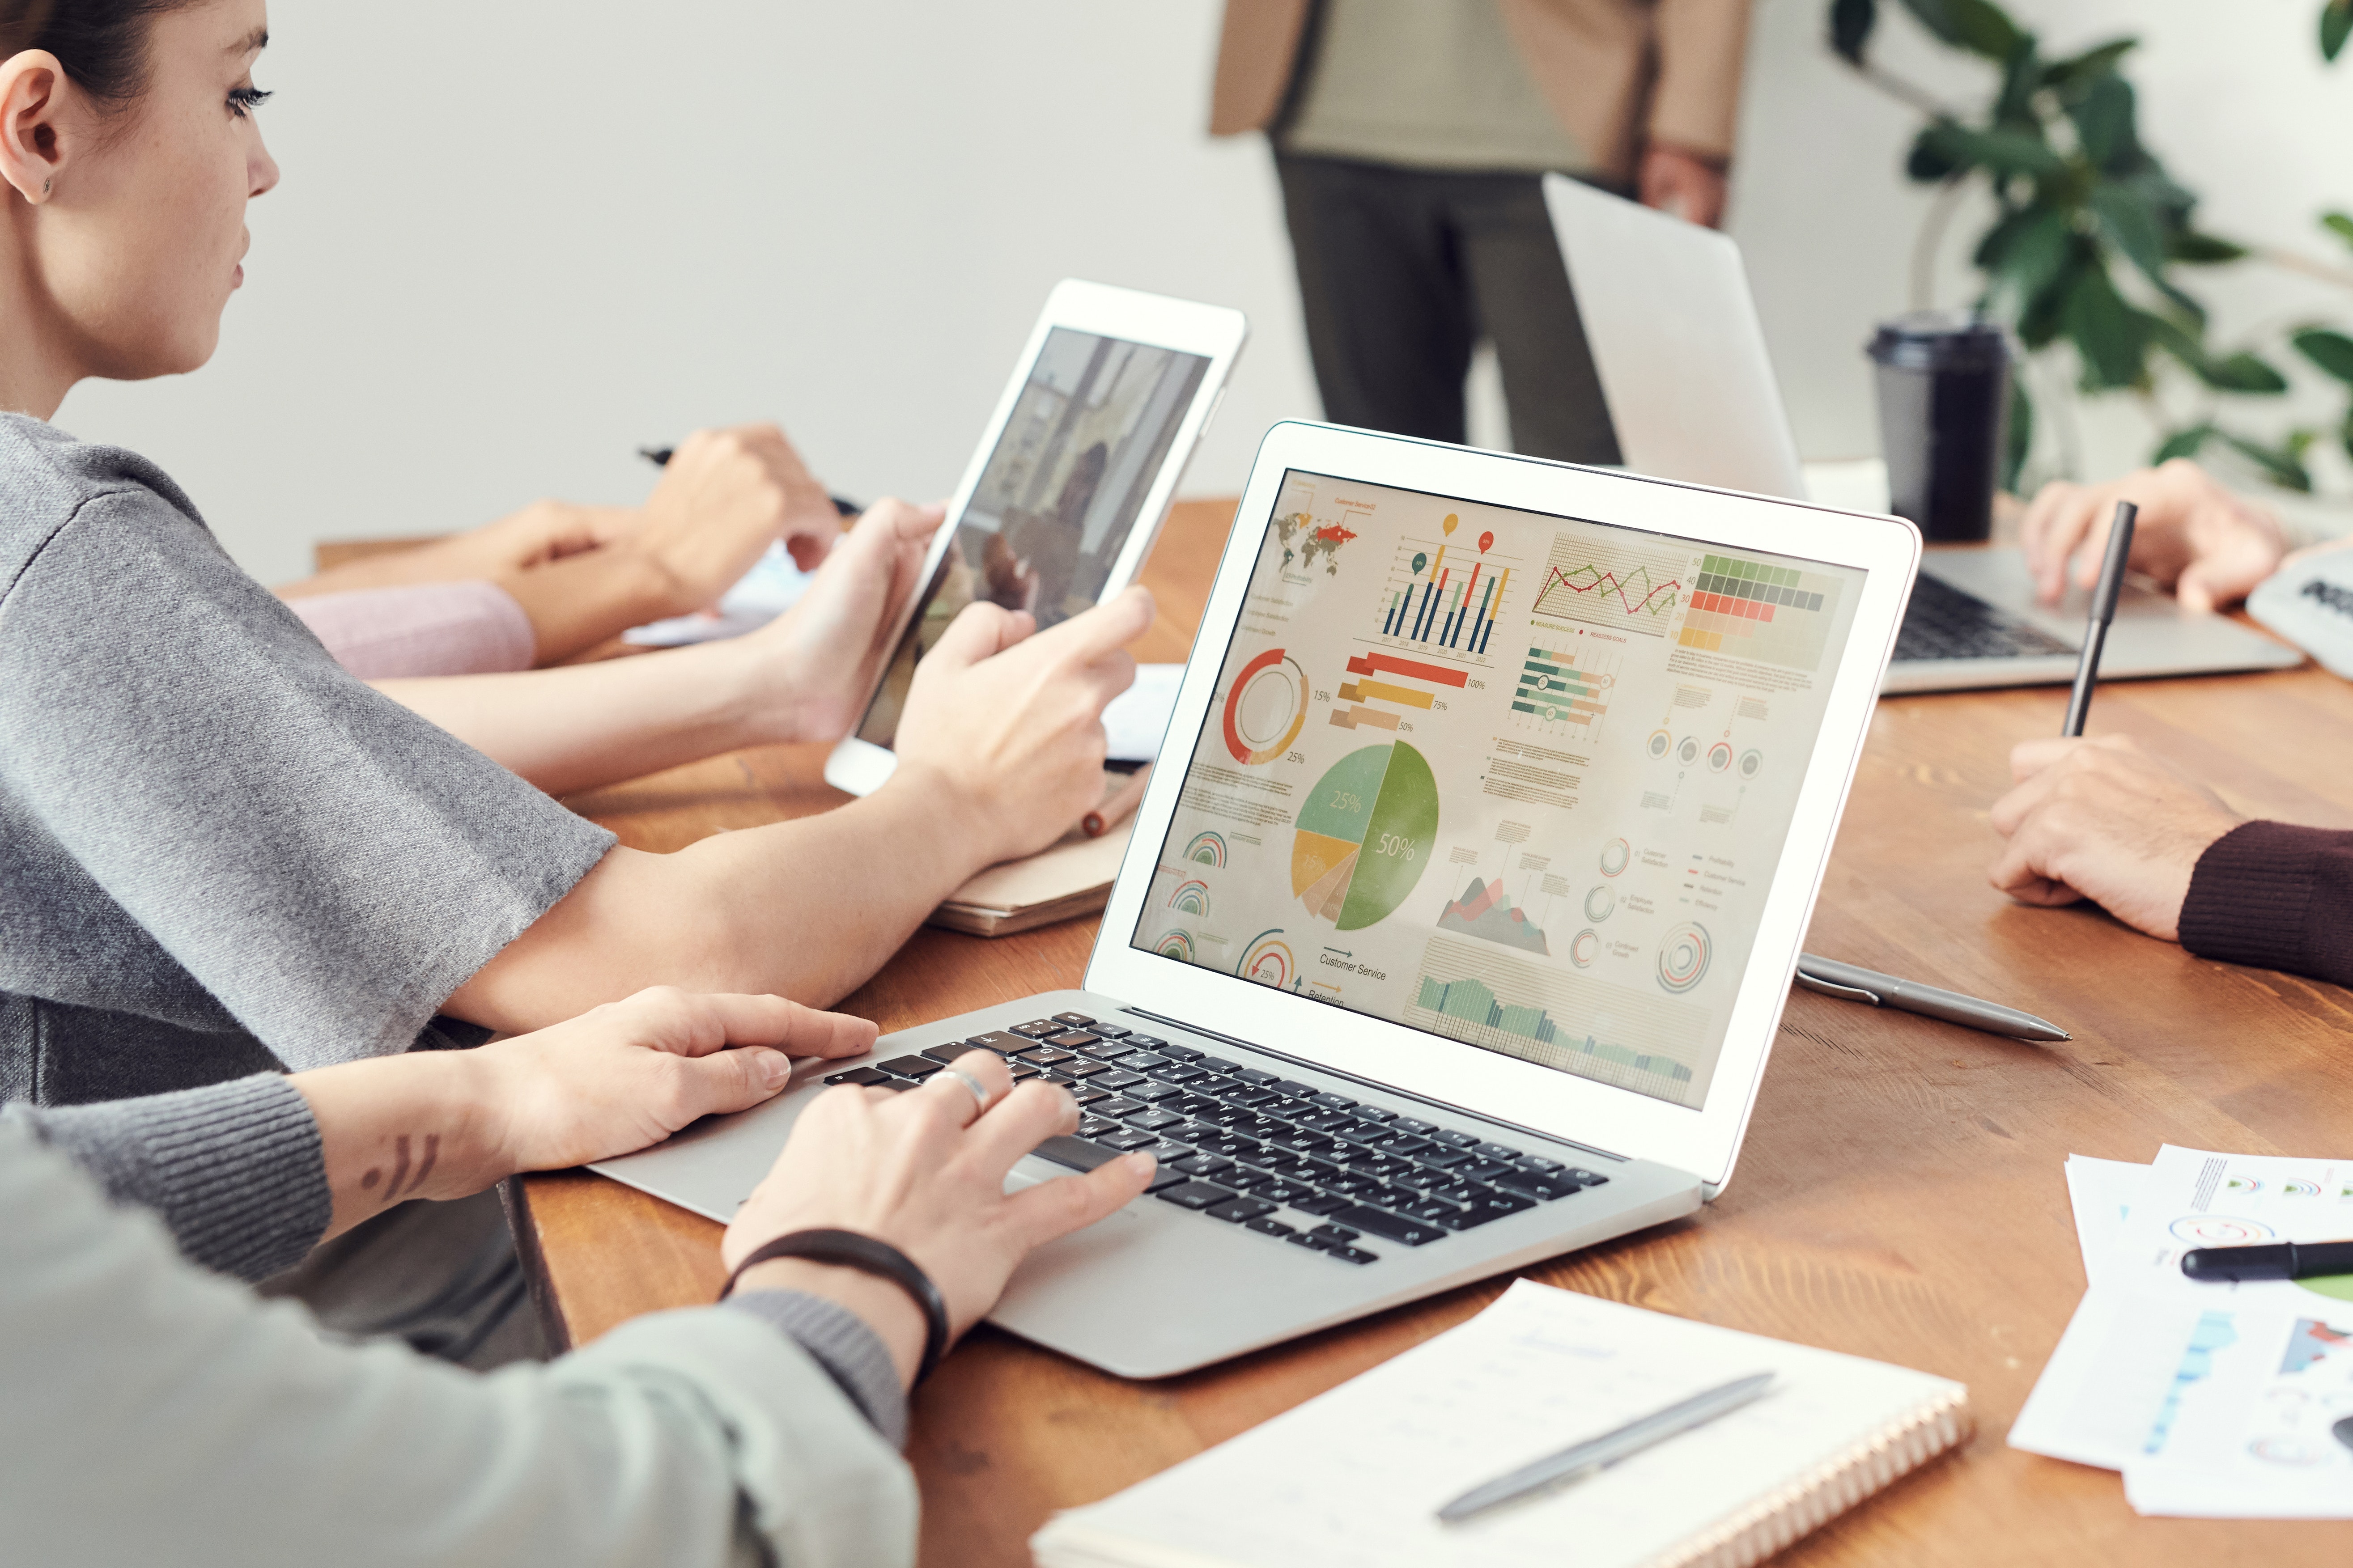 PowerPoint or Dashboards: Which one should you use?